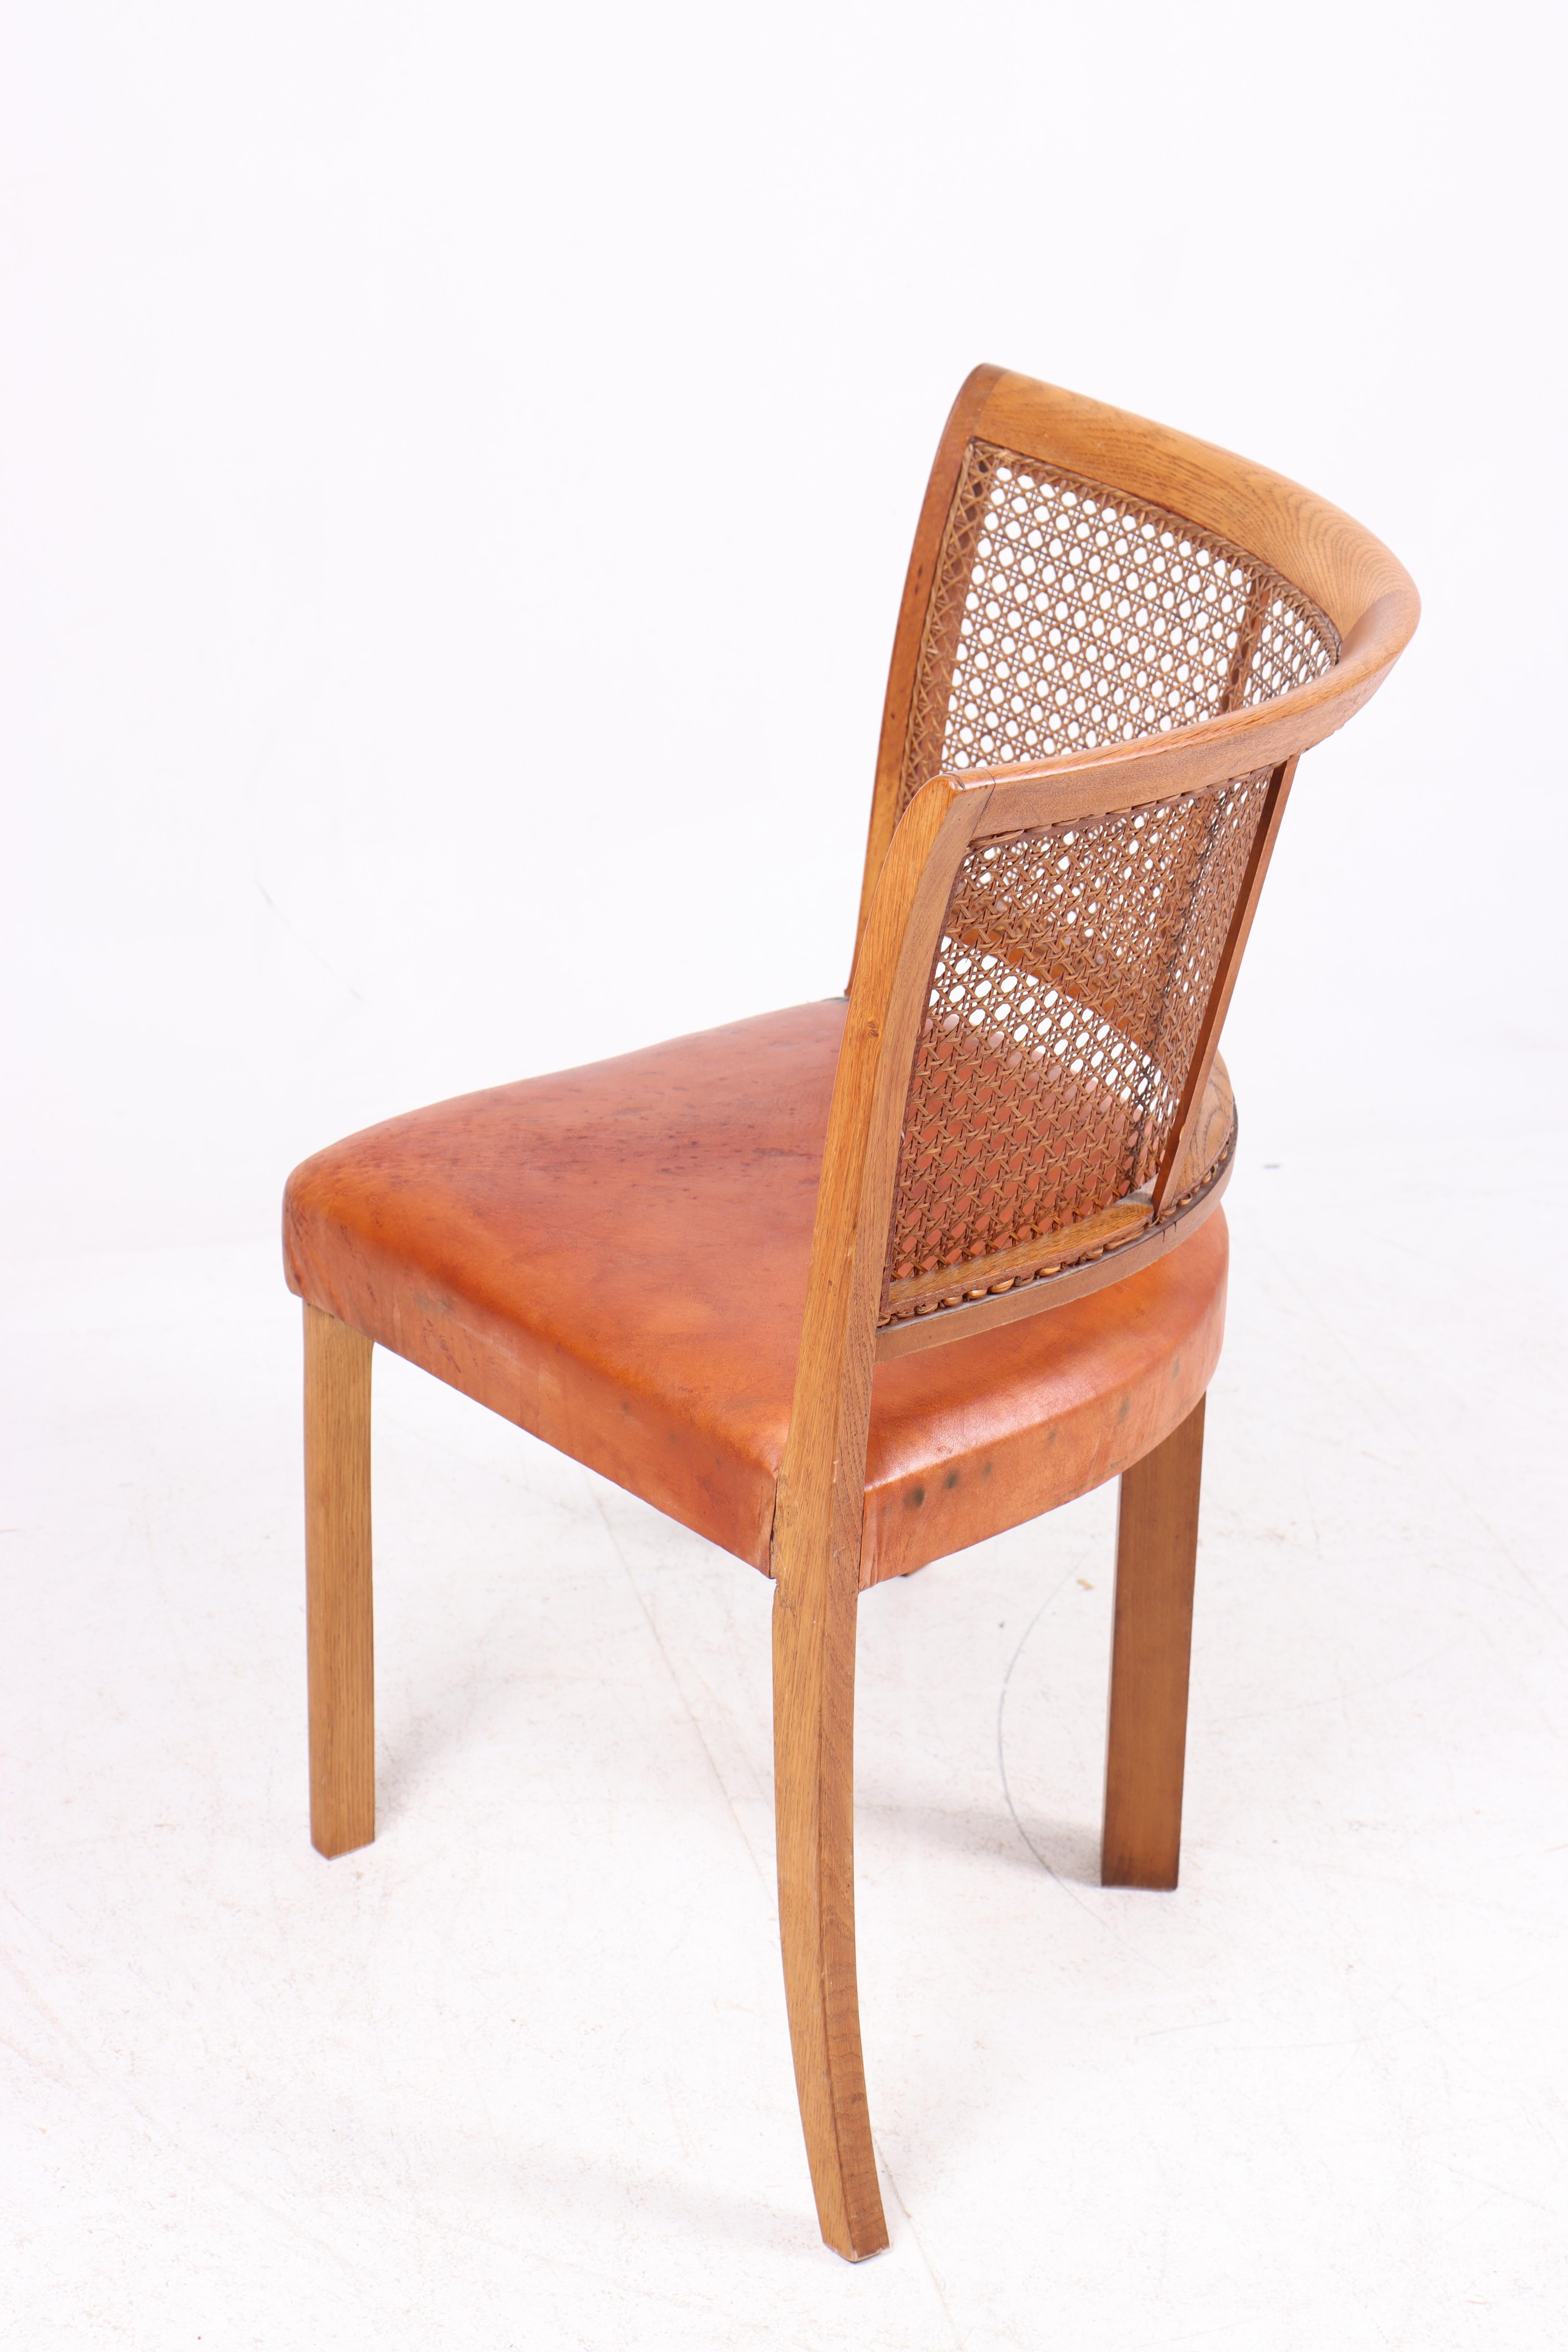 Mid-20th Century Danish Side Chair in Oak and Cognac Leather, 1940s For Sale